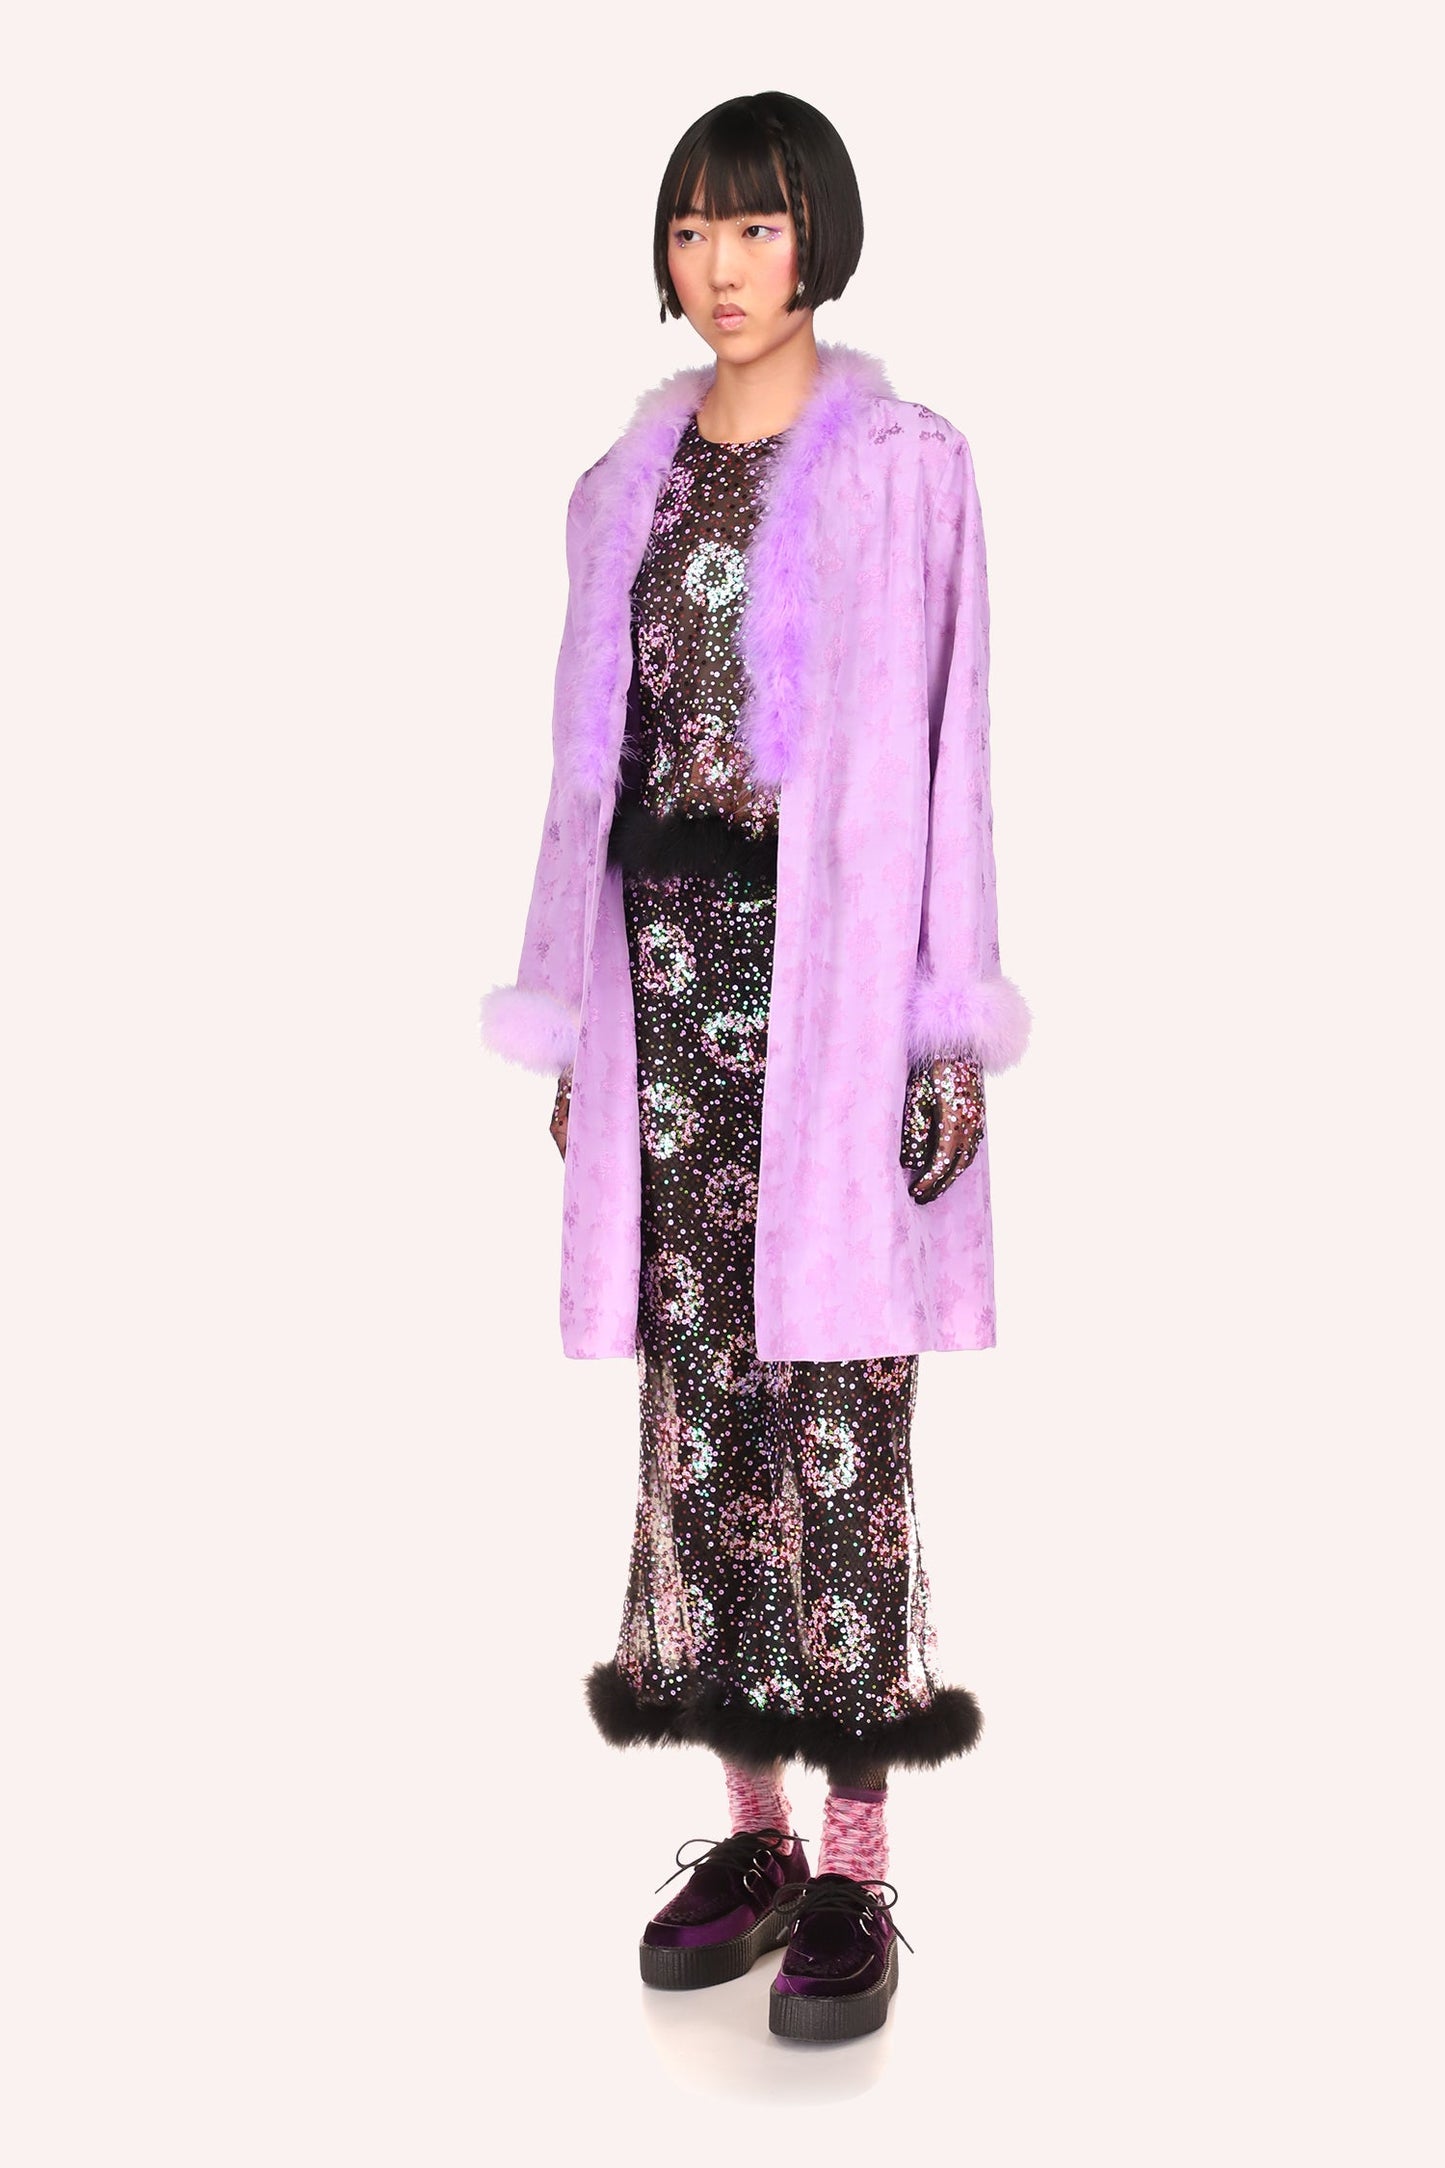 Floral Jacquard Robe Lavender, no button, no belt, Knee long, long sleeves with fluffy hem